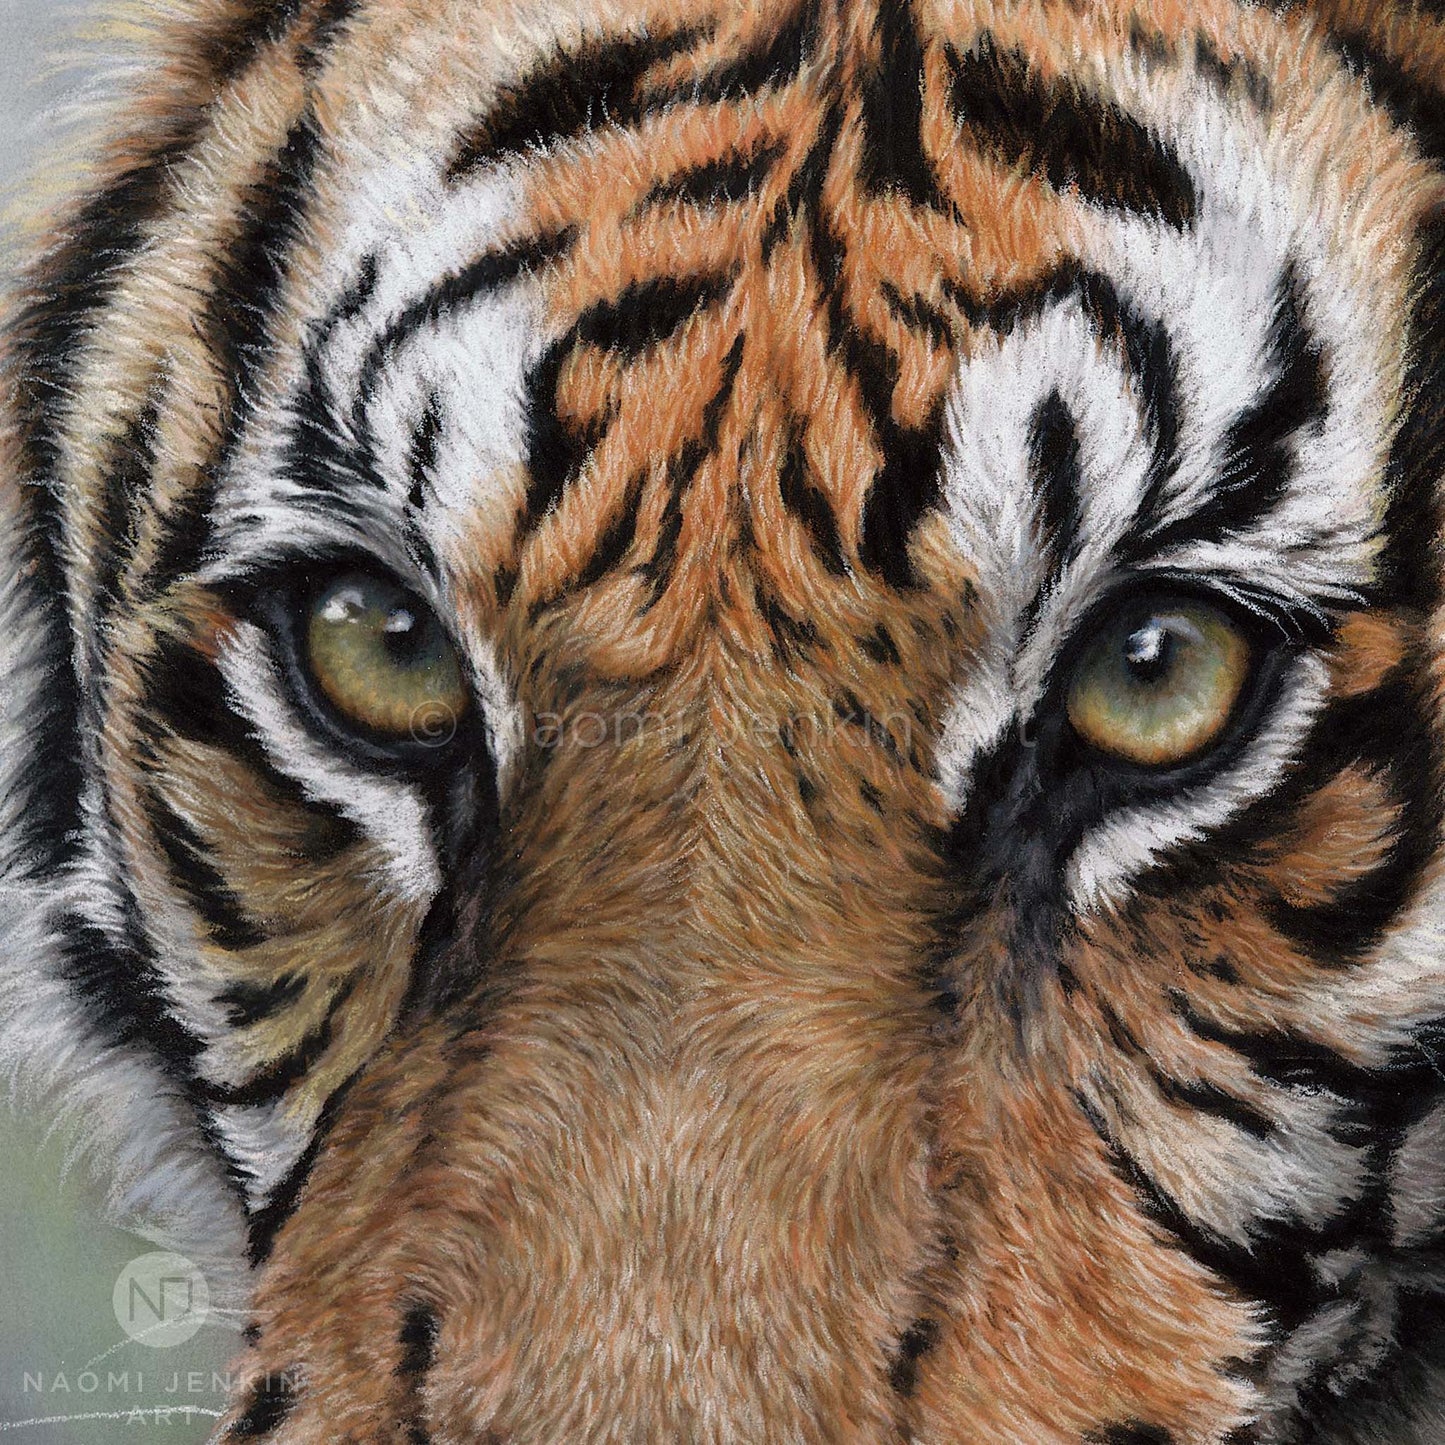 Detail from original tiger painting "Stealth" by Naomi Jenkin Art